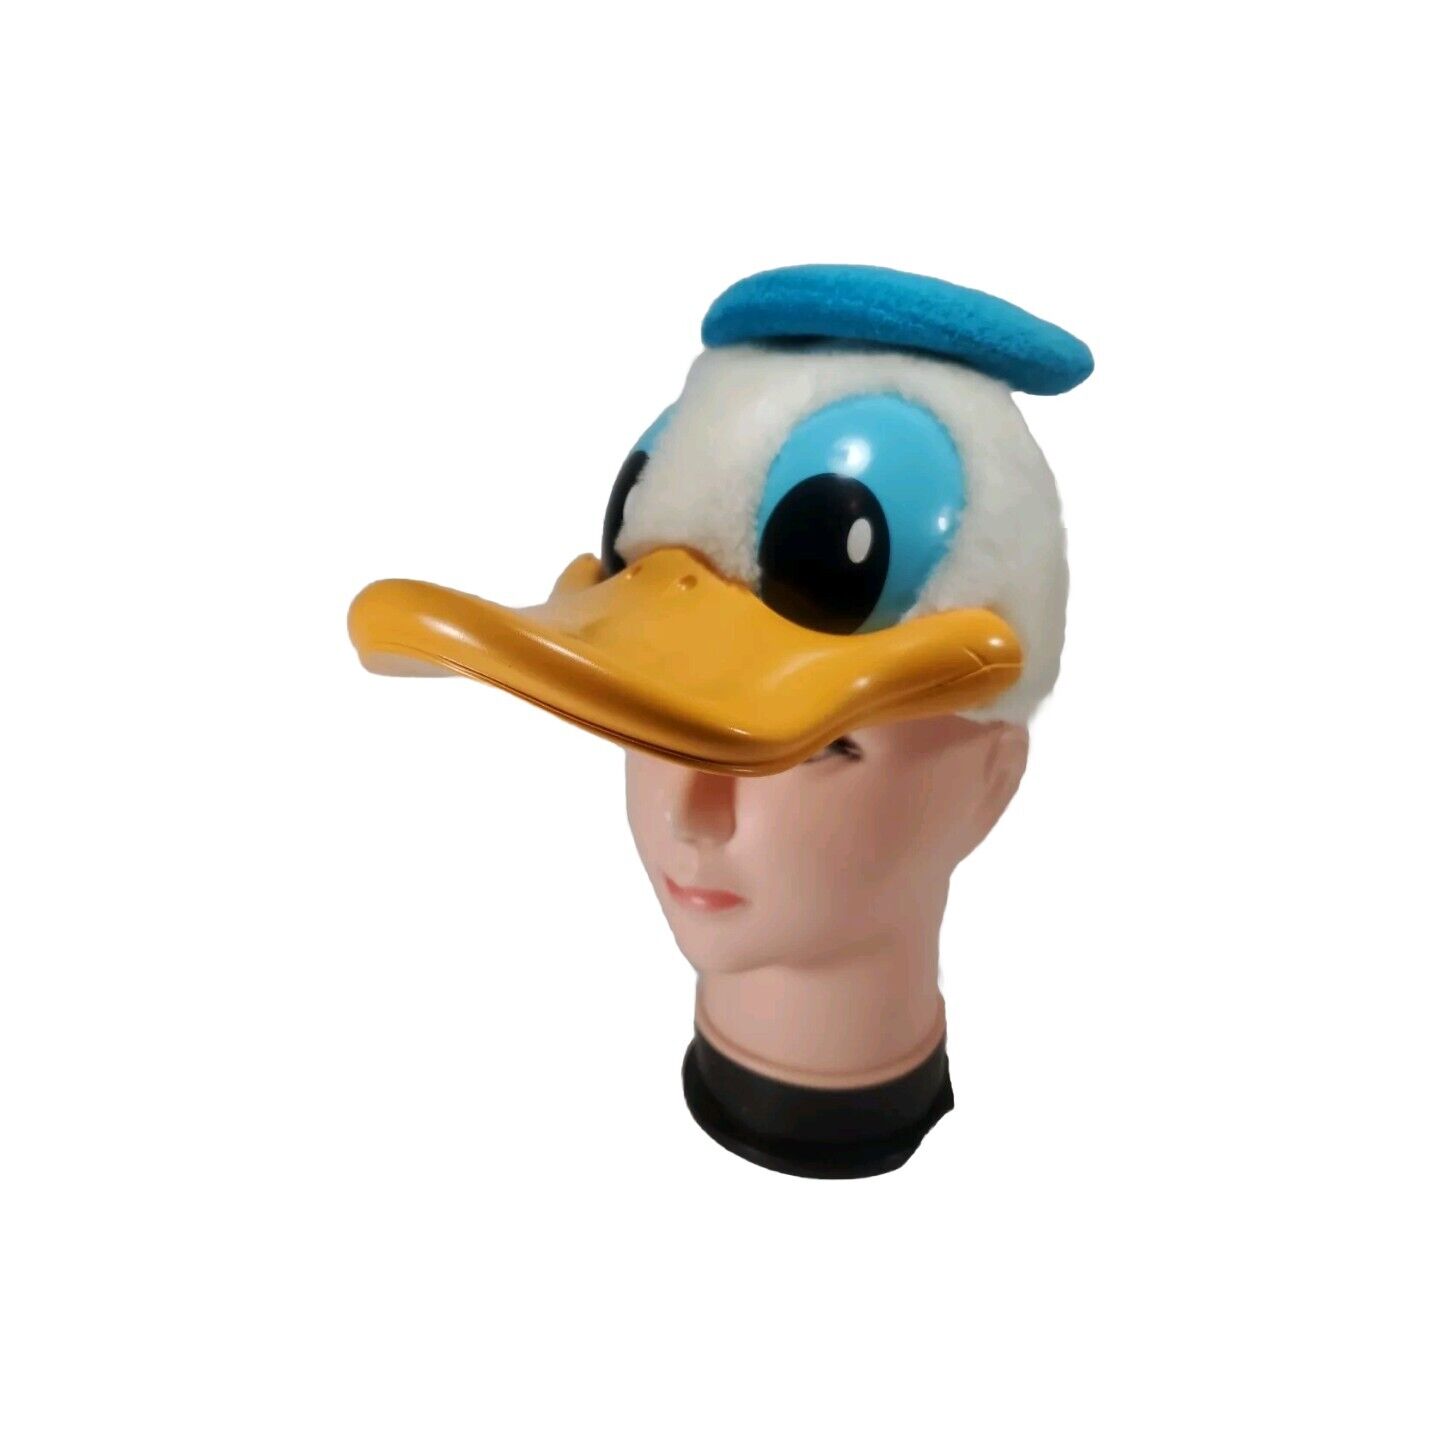 Vintage 80's Donald Duck Hat Disney Character Fashions Head Snapback USA Made